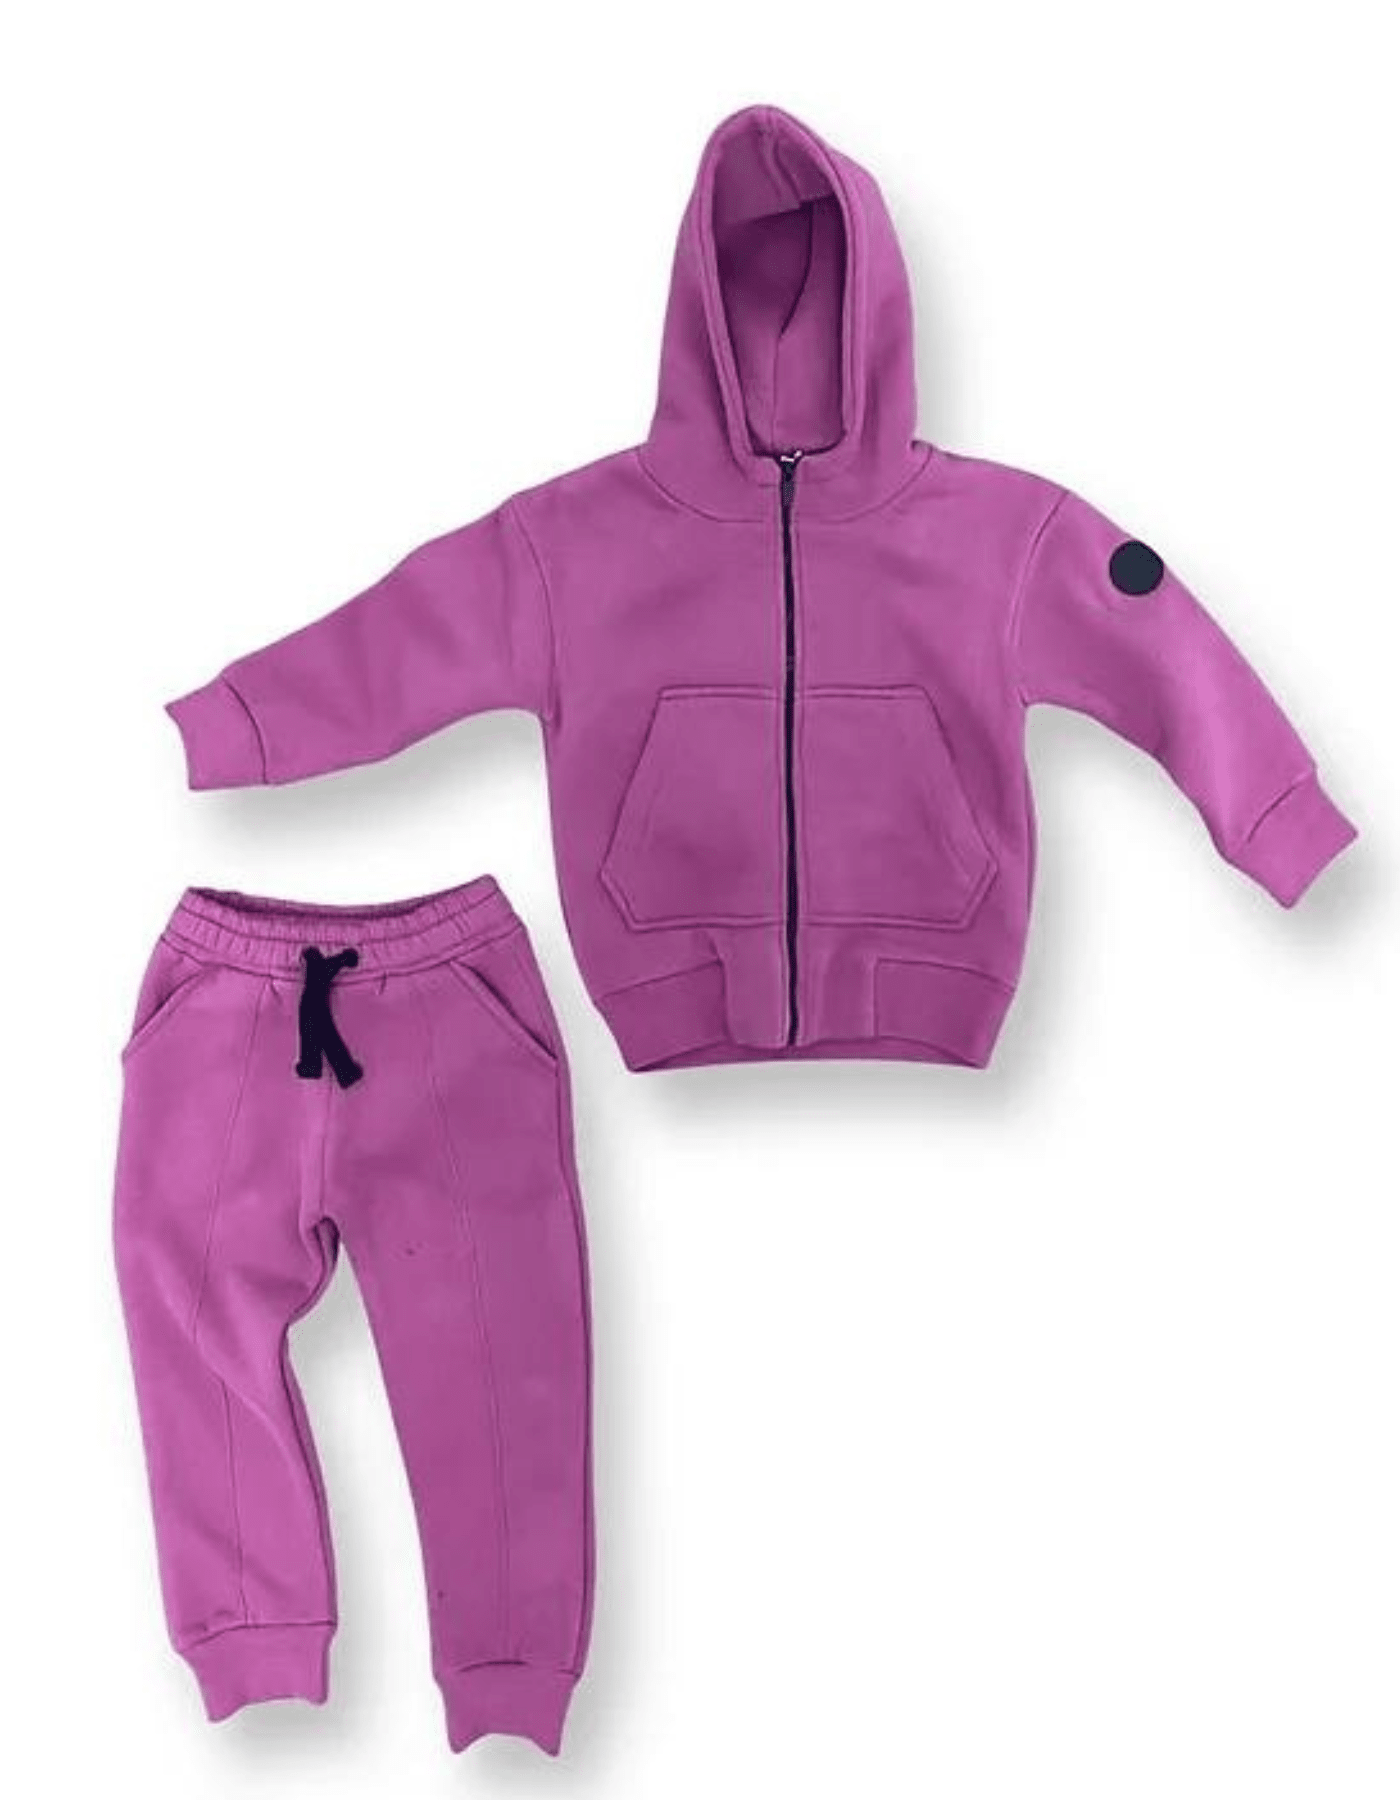 Jagger tracksuit tracksuit North Kidzz fusion pink 3-4 yrs 